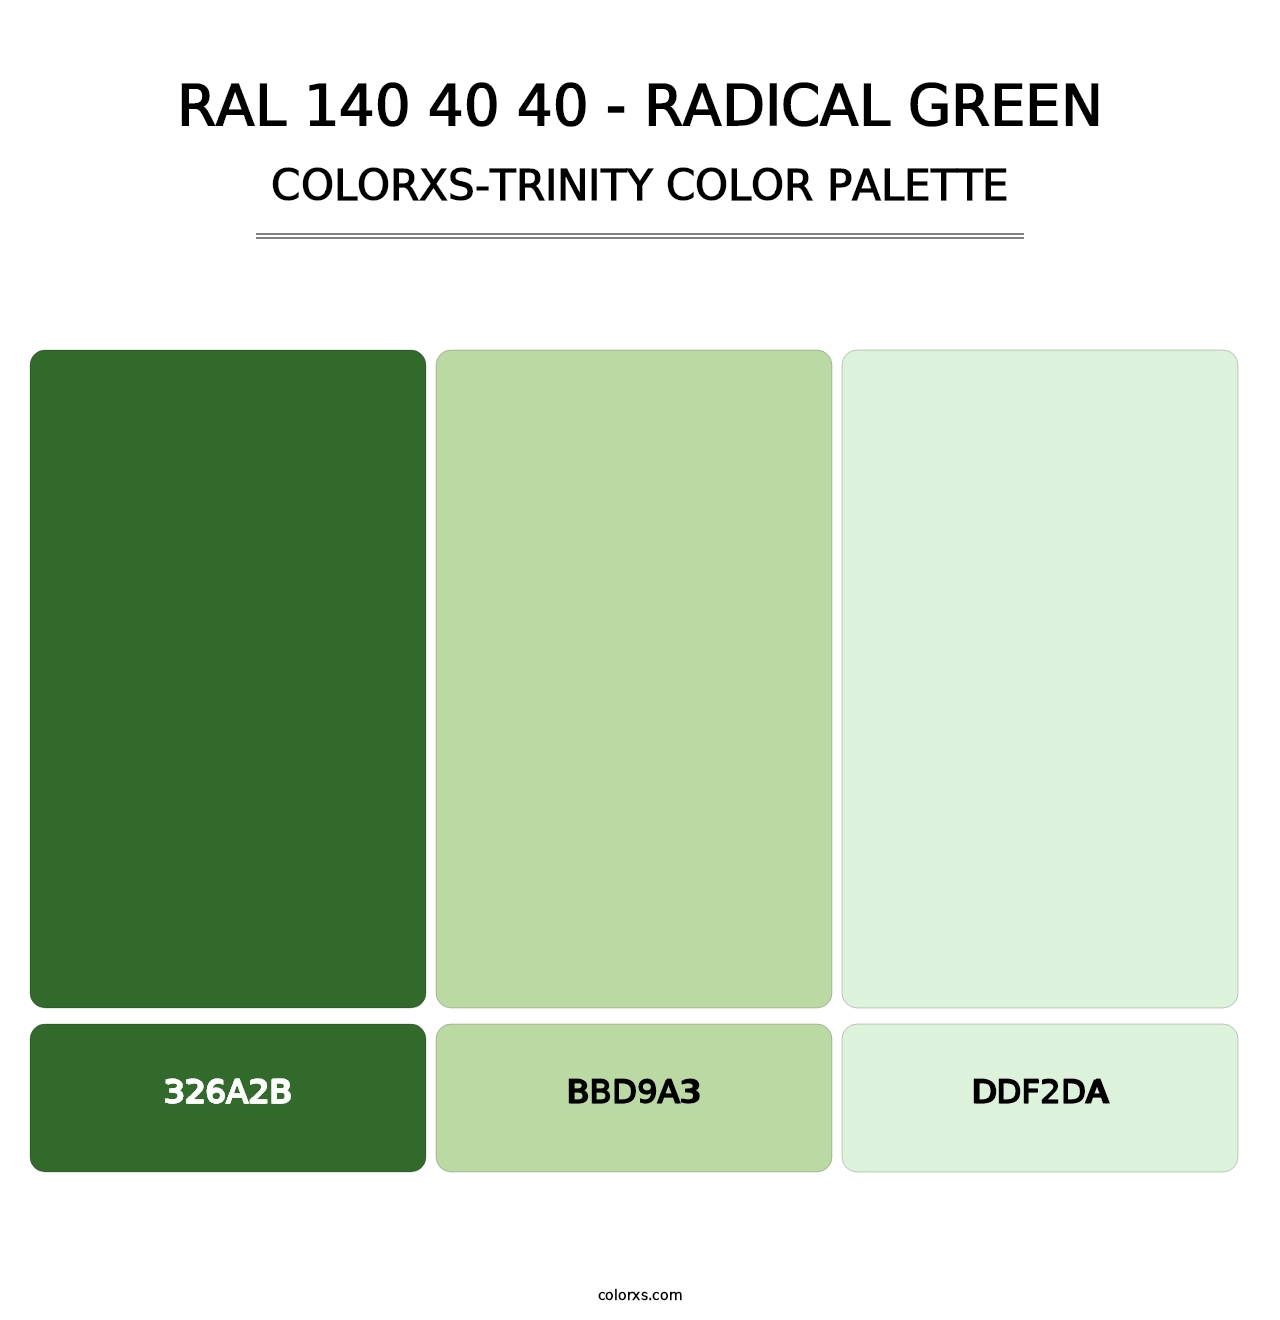 RAL 140 40 40 - Radical Green - Colorxs Trinity Palette